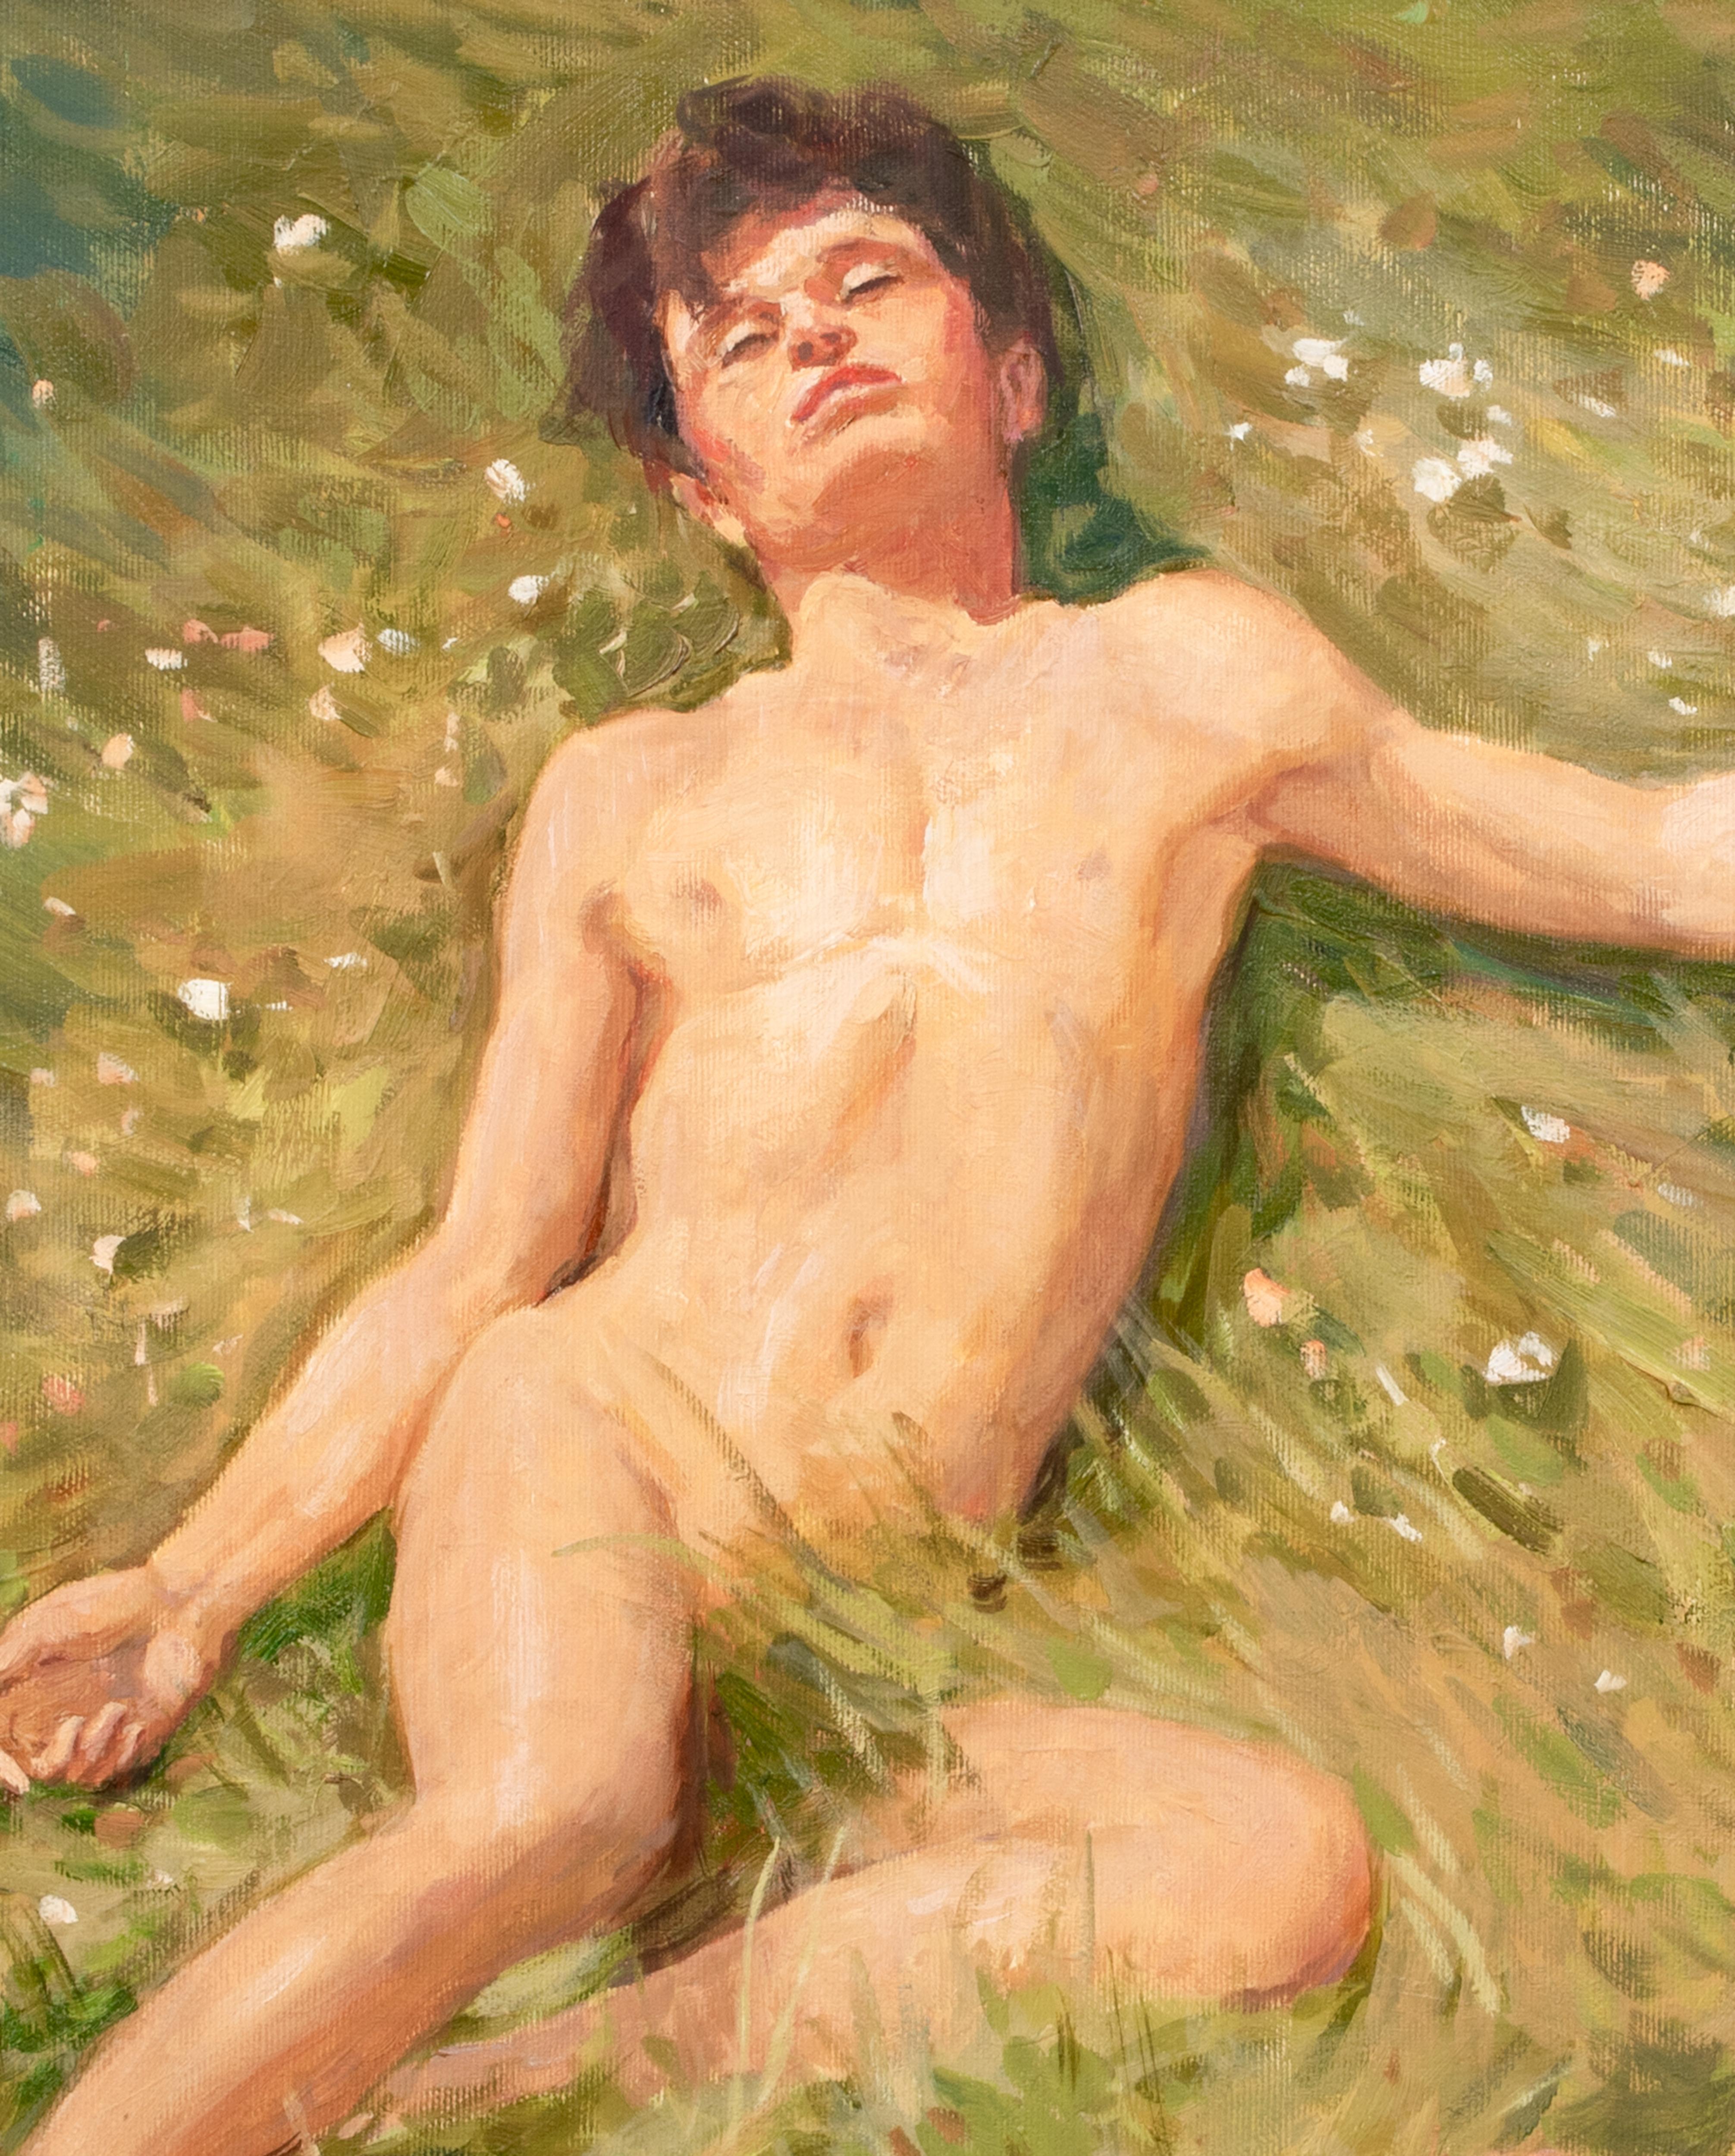 Nude Boys In The Summer Grass   For Sale 4